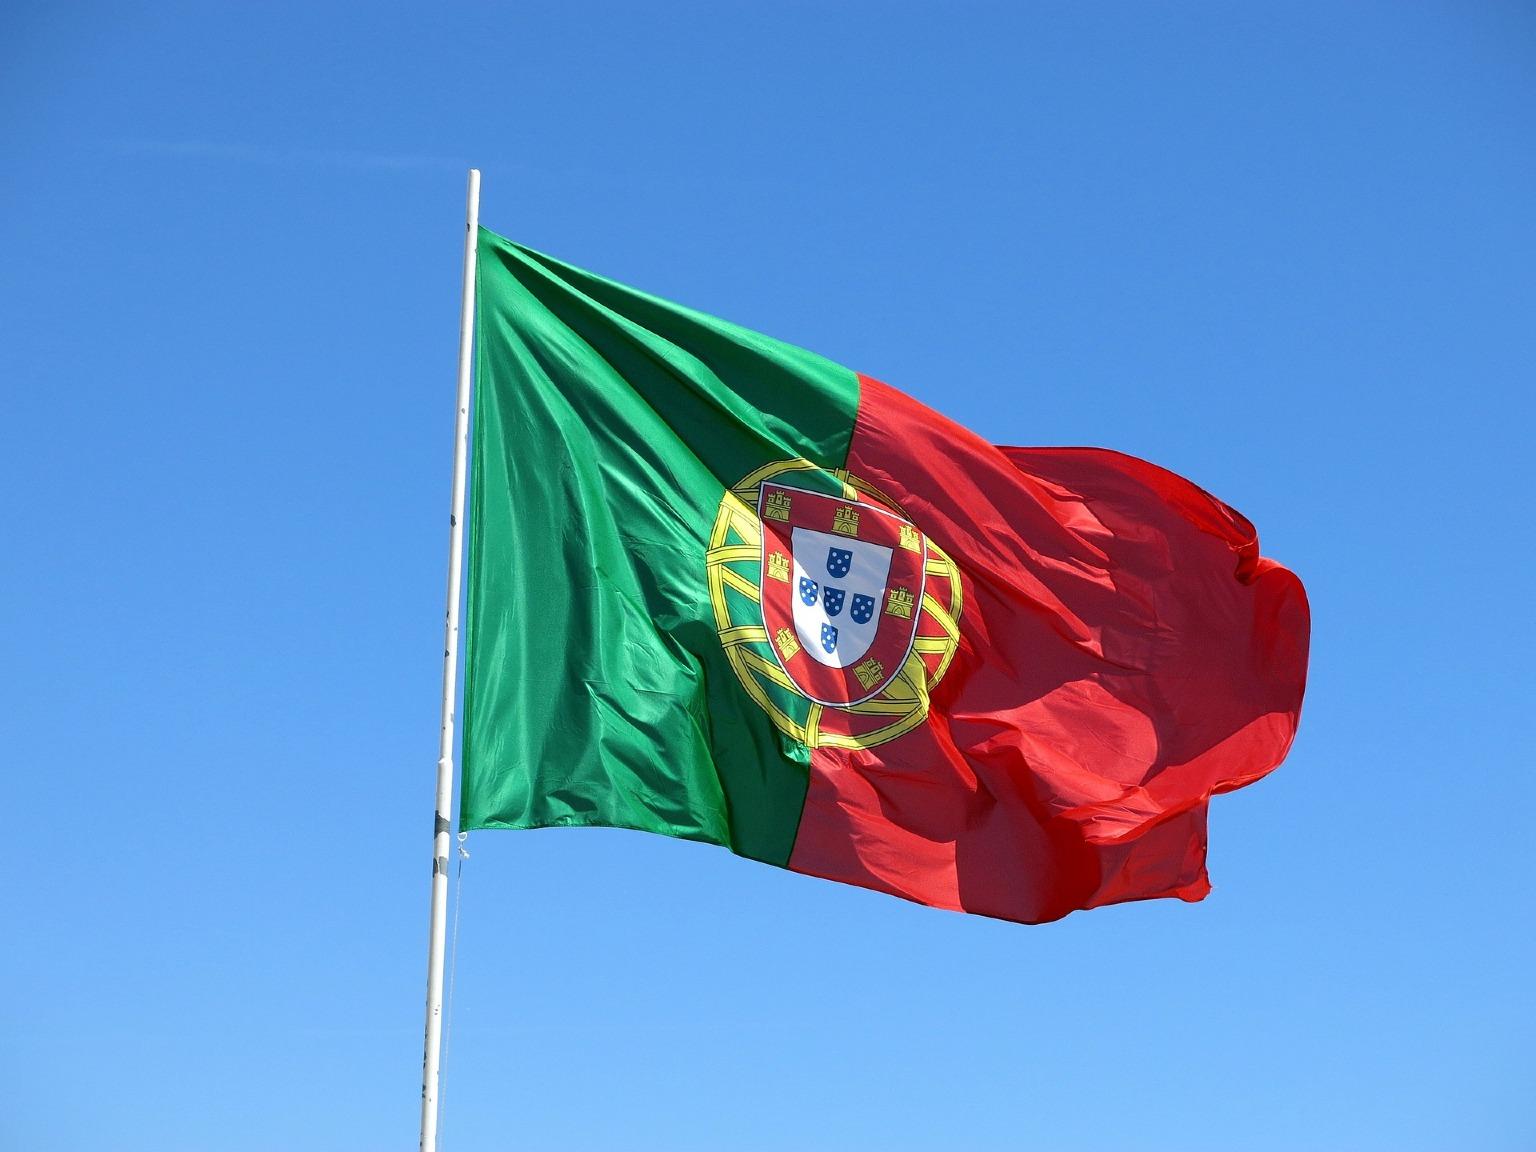 Flag of Portugal waving against blue sky background. Celebrating Portugal Day and the unity of the Portuguese people.